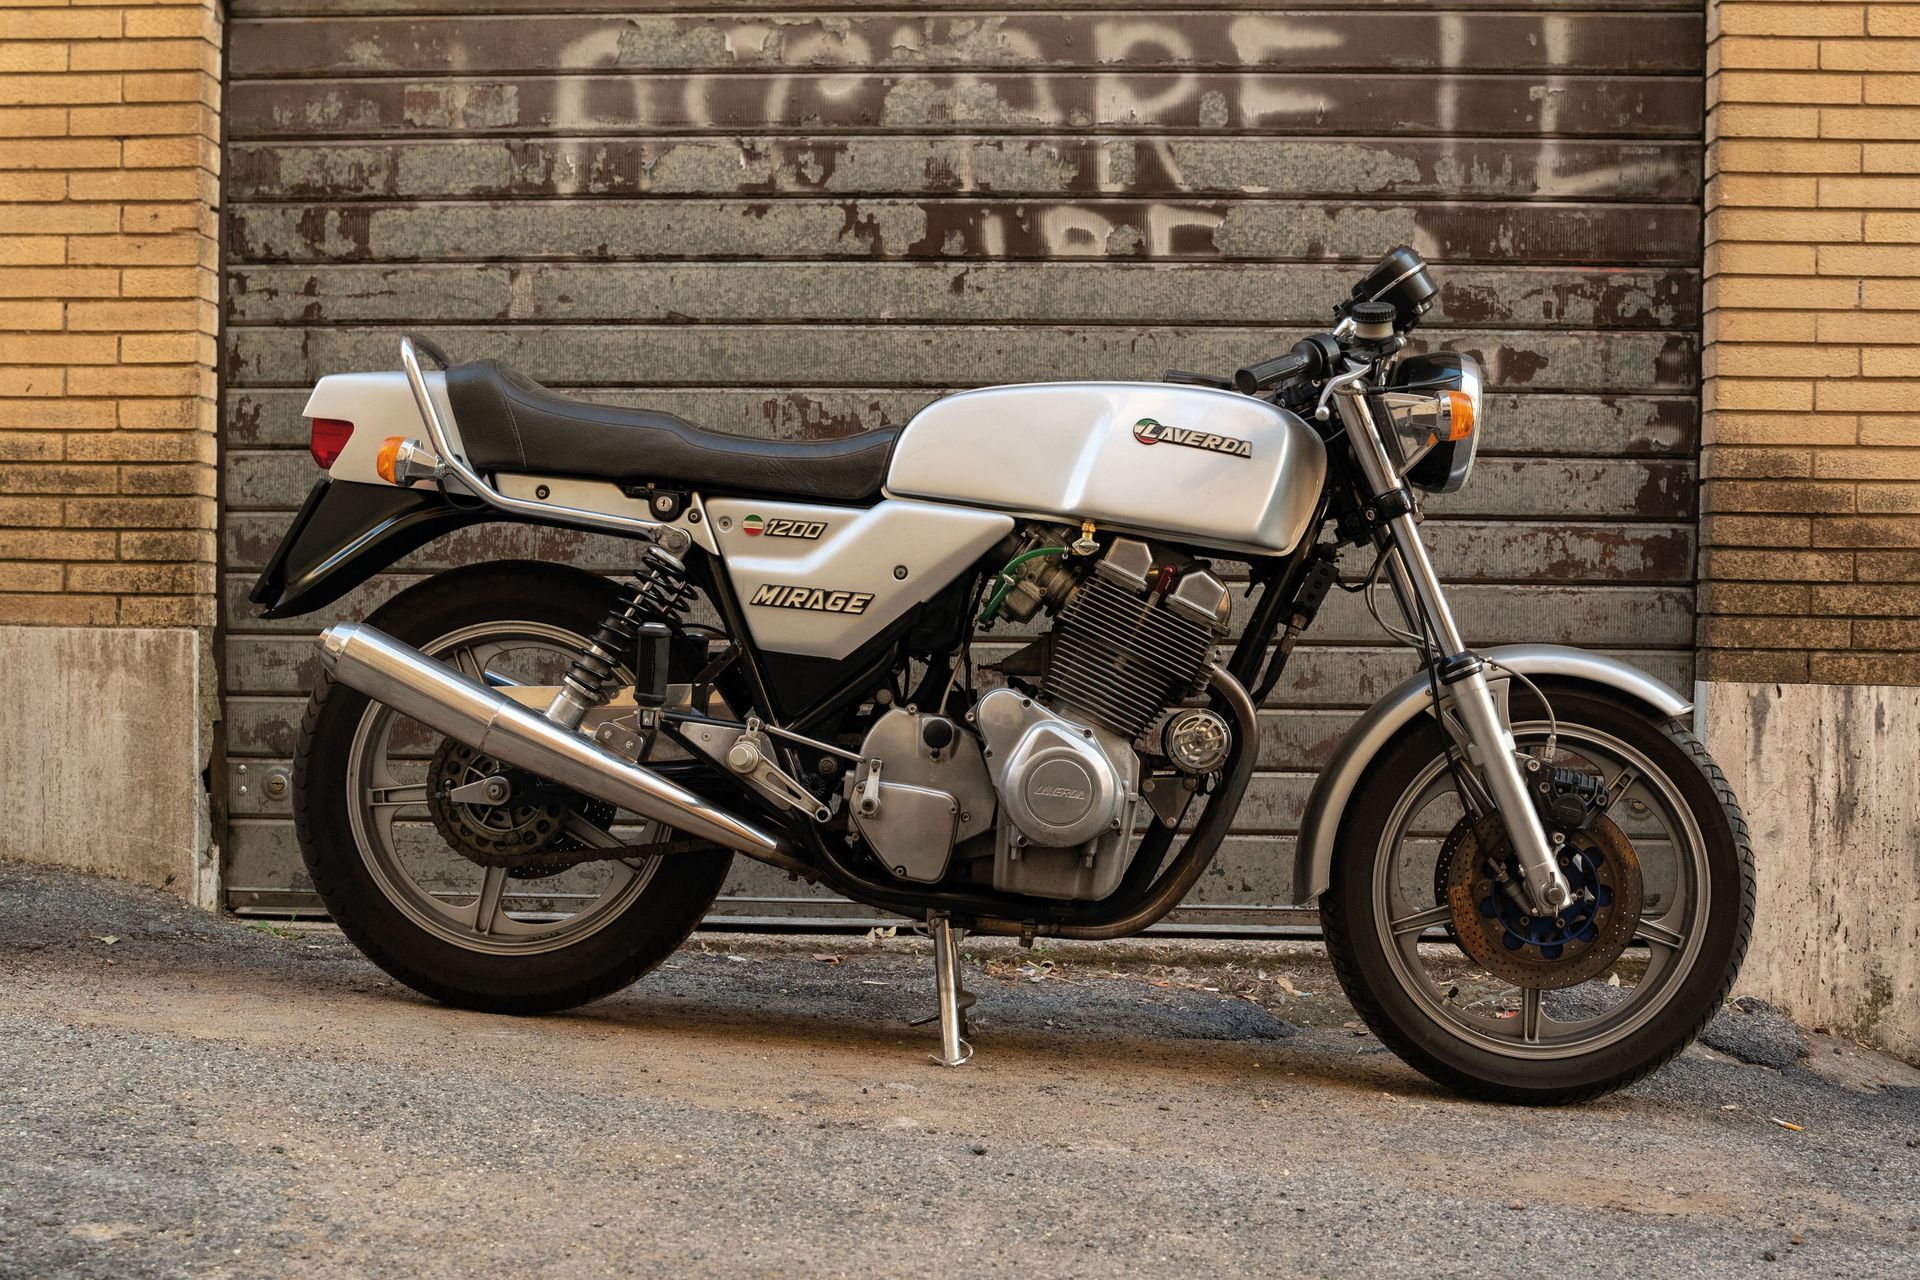 LAVERDA 1200 MIRAGE, 1983 
Chassis/Chassis n. 3170

- The 1200 version of the La&hellip;